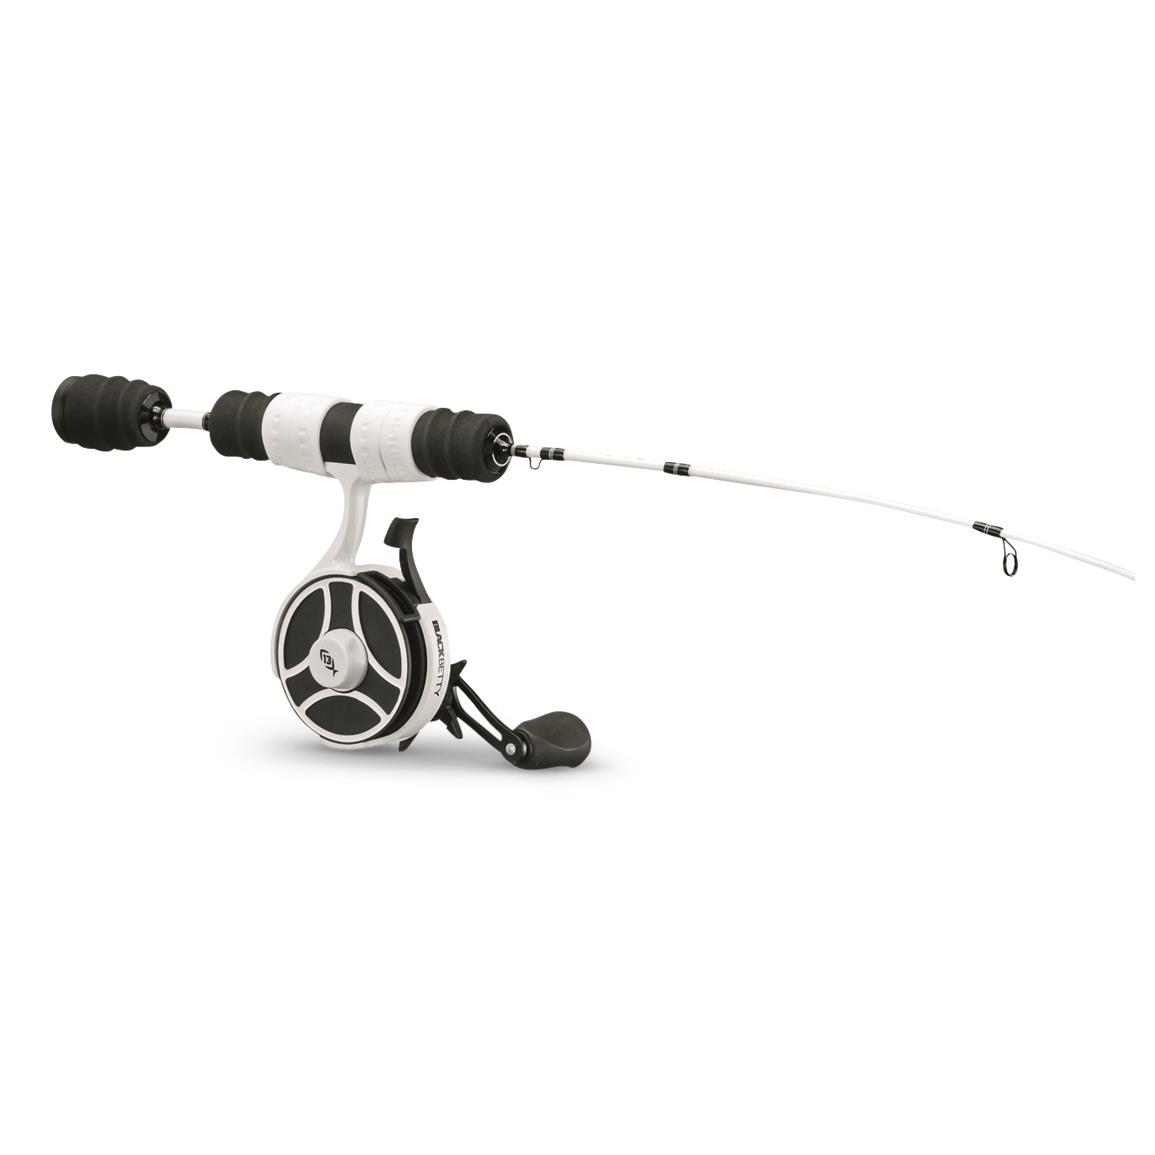 Frabill VYPR Inline Ice Fishing Combo, 27 Length, Light Action - 724518, Ice  Fishing Combos at Sportsman's Guide